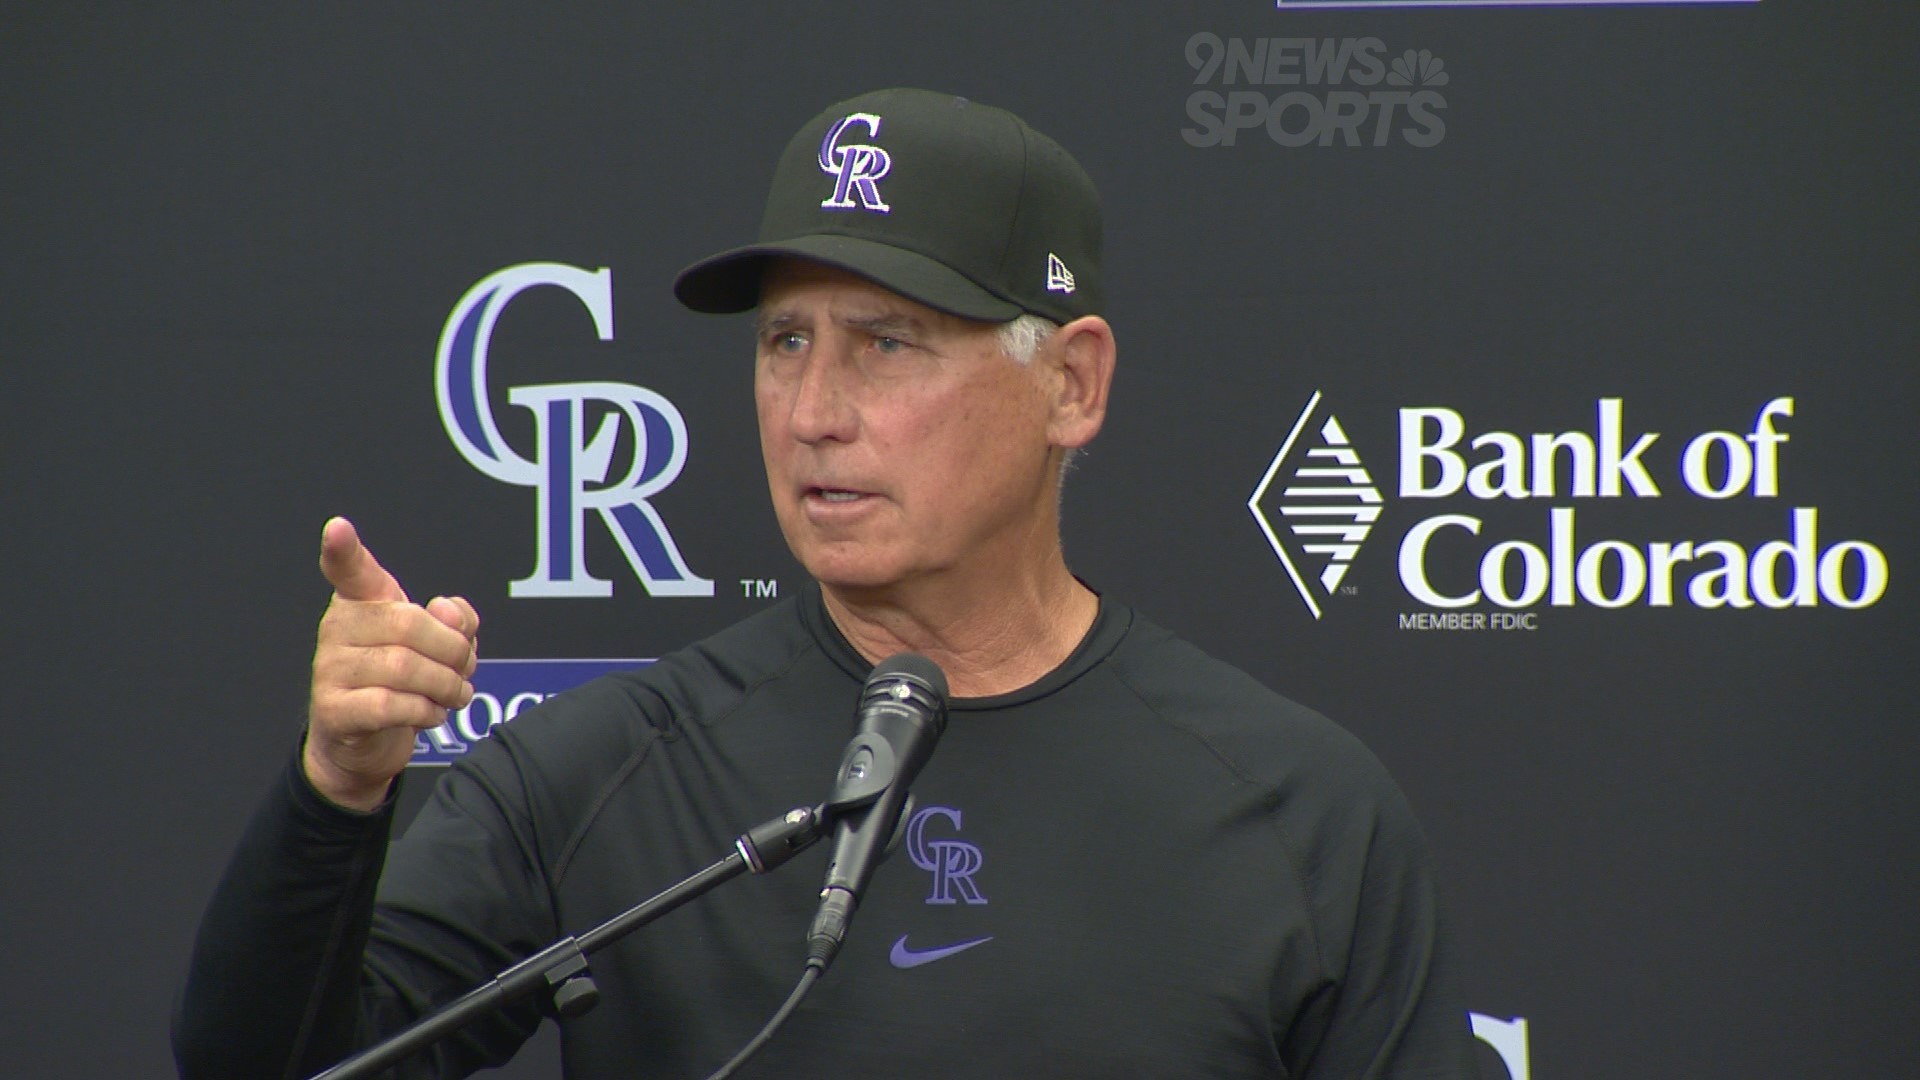 The Colorado Rockies manager talked about how special his team's late rally to win on Friday afternoon at Coors Field.